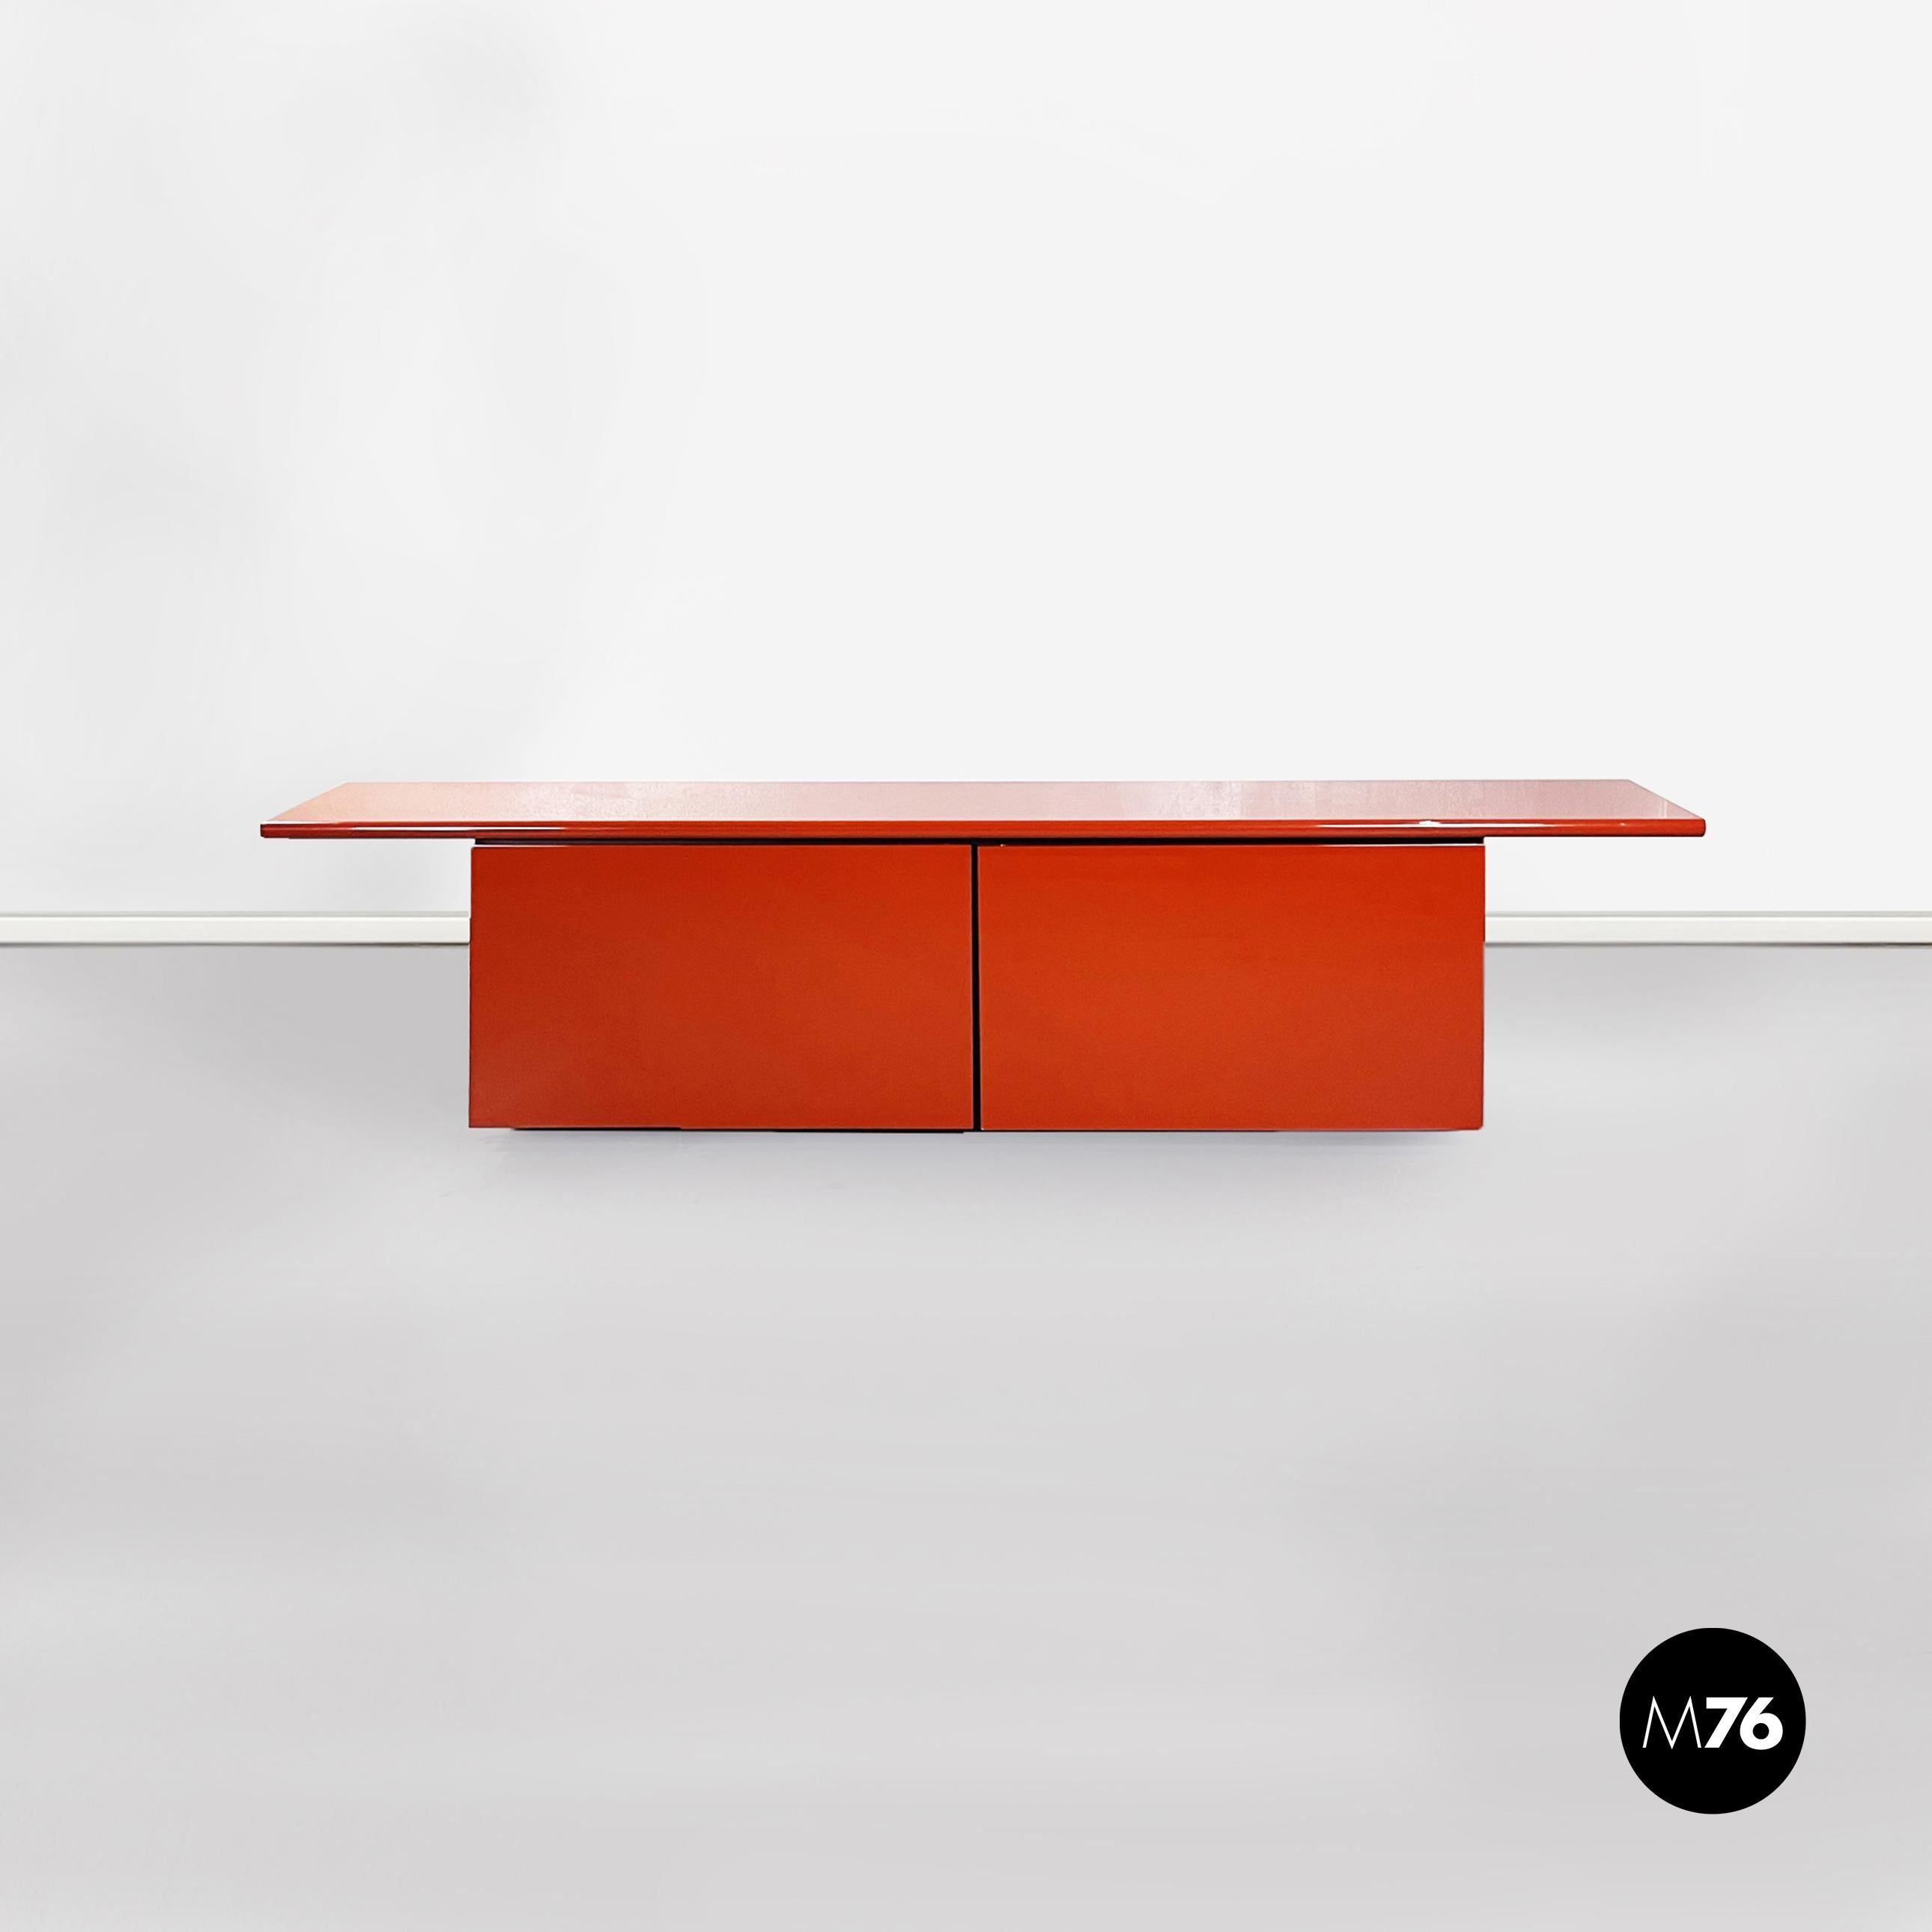 Italian mid-century Sheraton sideboard by Stoppino and Acerbis for Acerbis, 1980s.
Sheraton sideboard in light red lacquered solid wood with protruding rectangular top. Swing door with 4 drawers and 3 compartments inside with original aquamarine